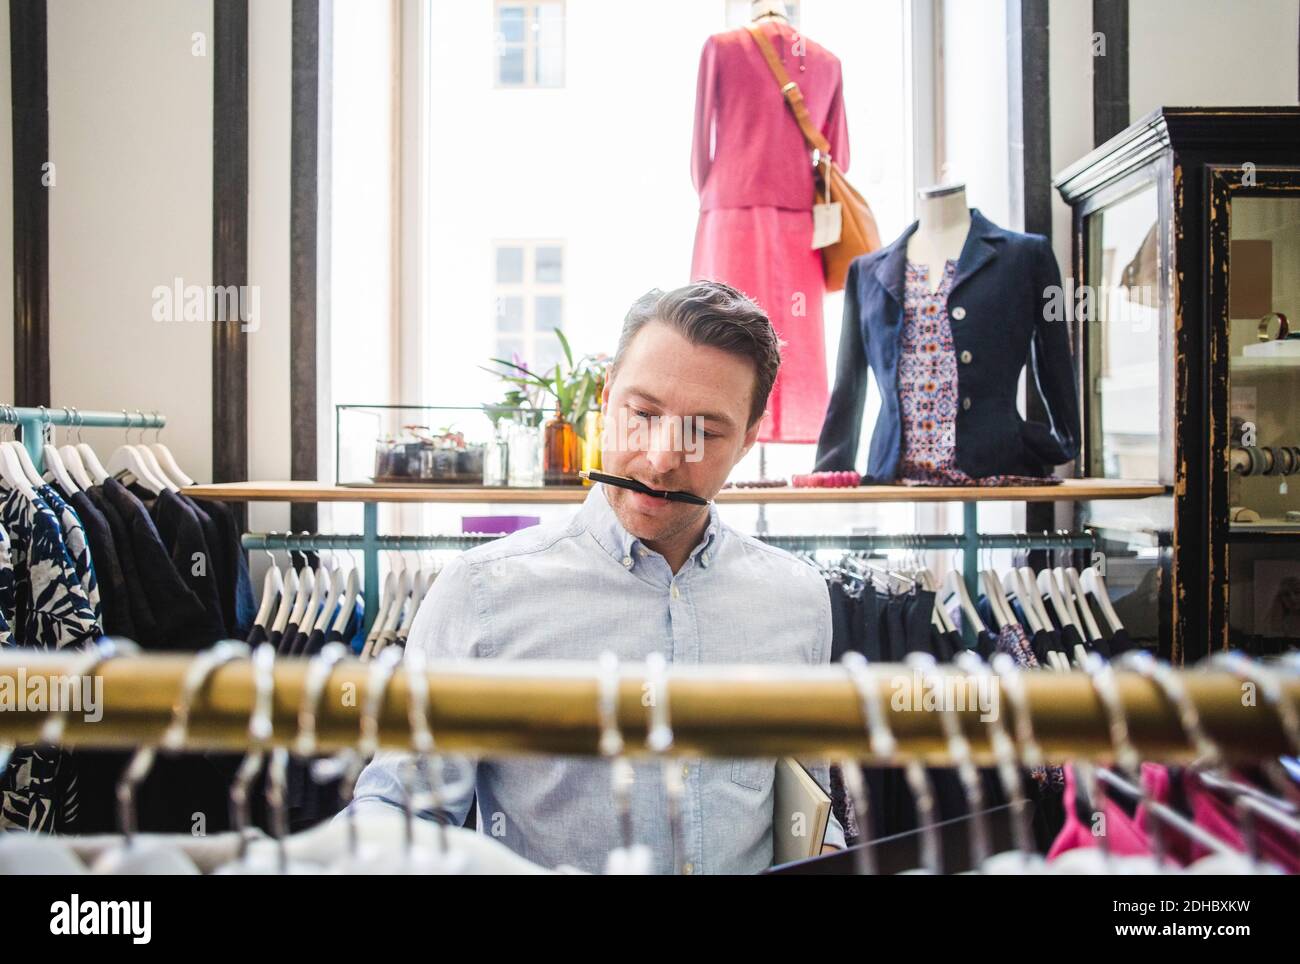 Salesman carrying pen in mouth while looking at clothes rack Stock Photo